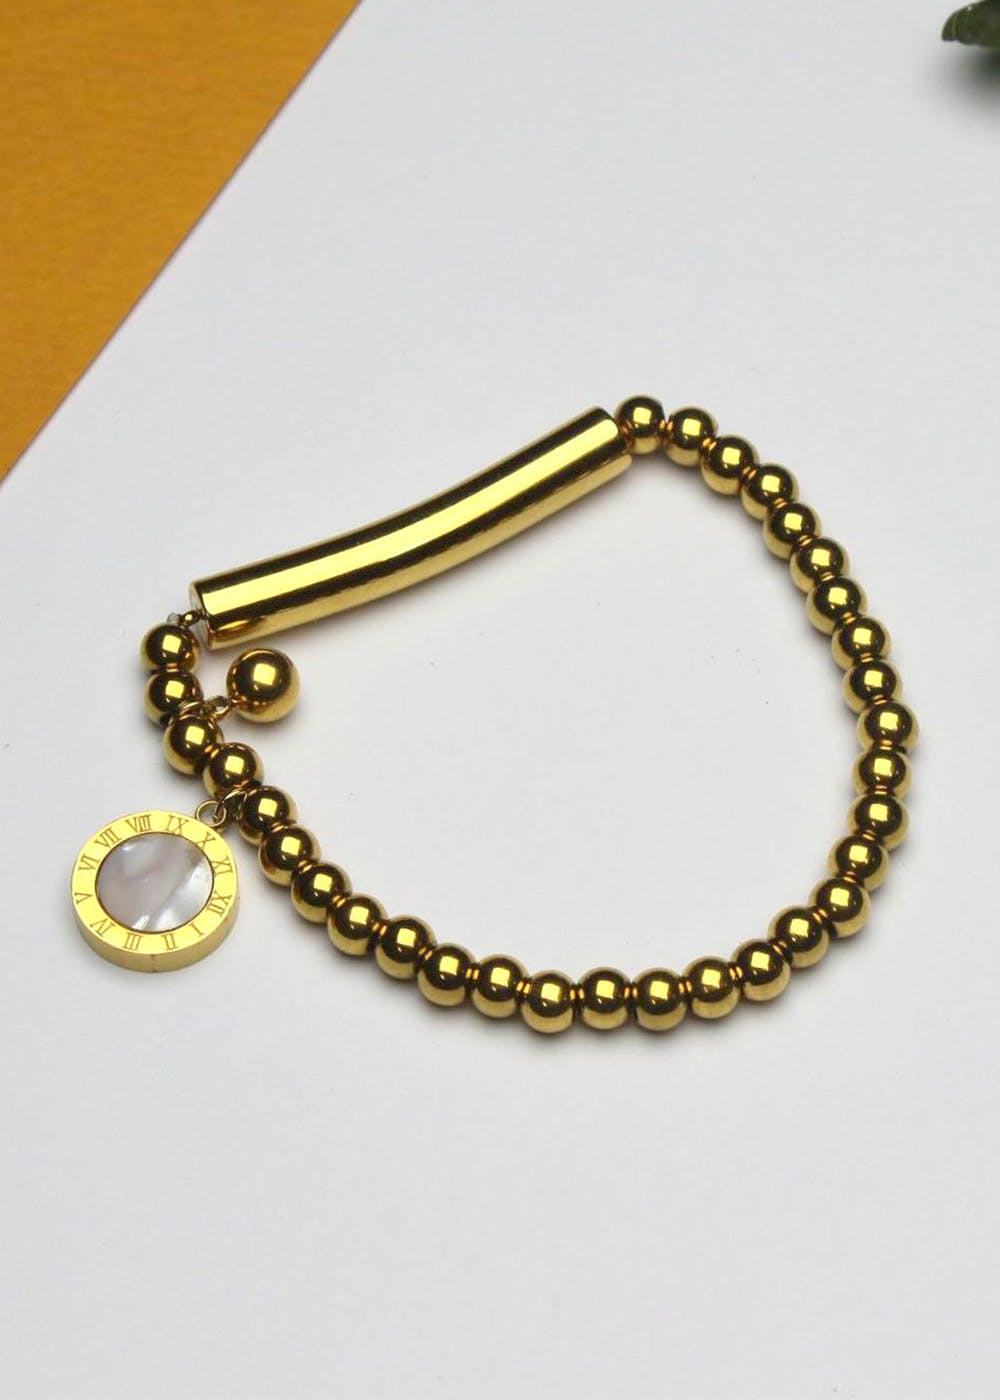 Golden Bracelet With Black And White Motif